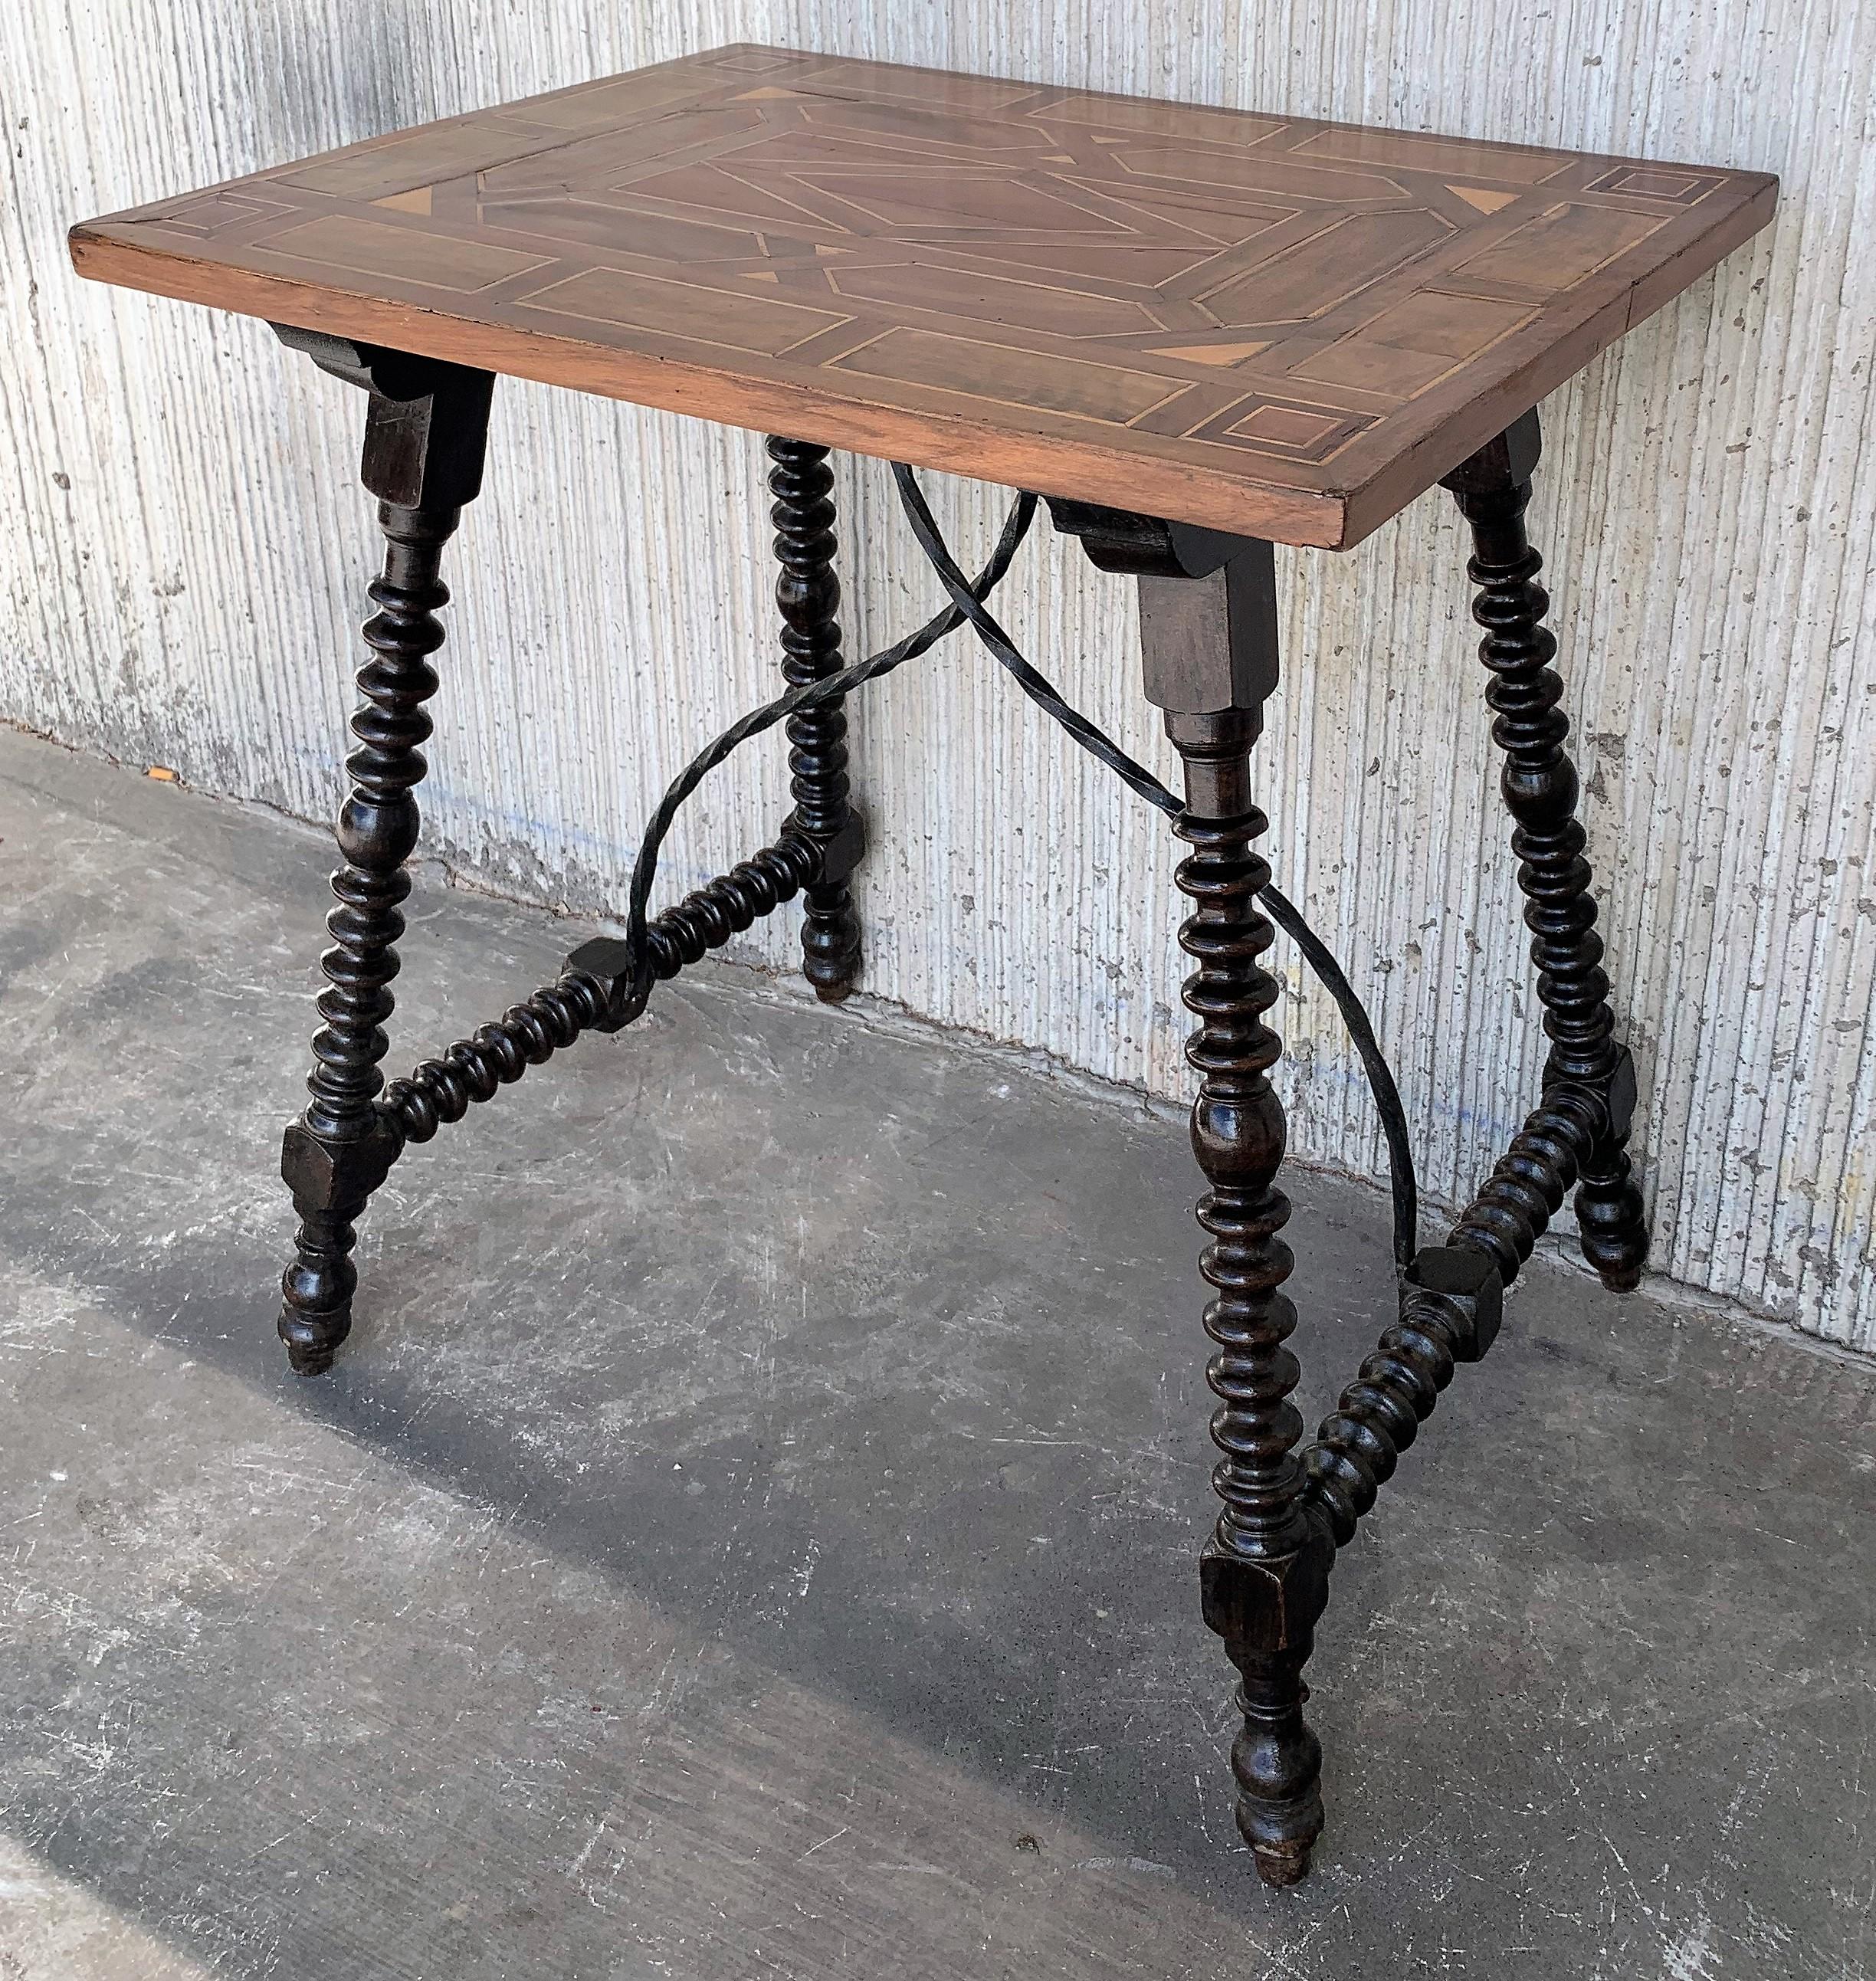 19th Century Baroque Spanish Side Table with Marquetry Top (19. Jahrhundert)